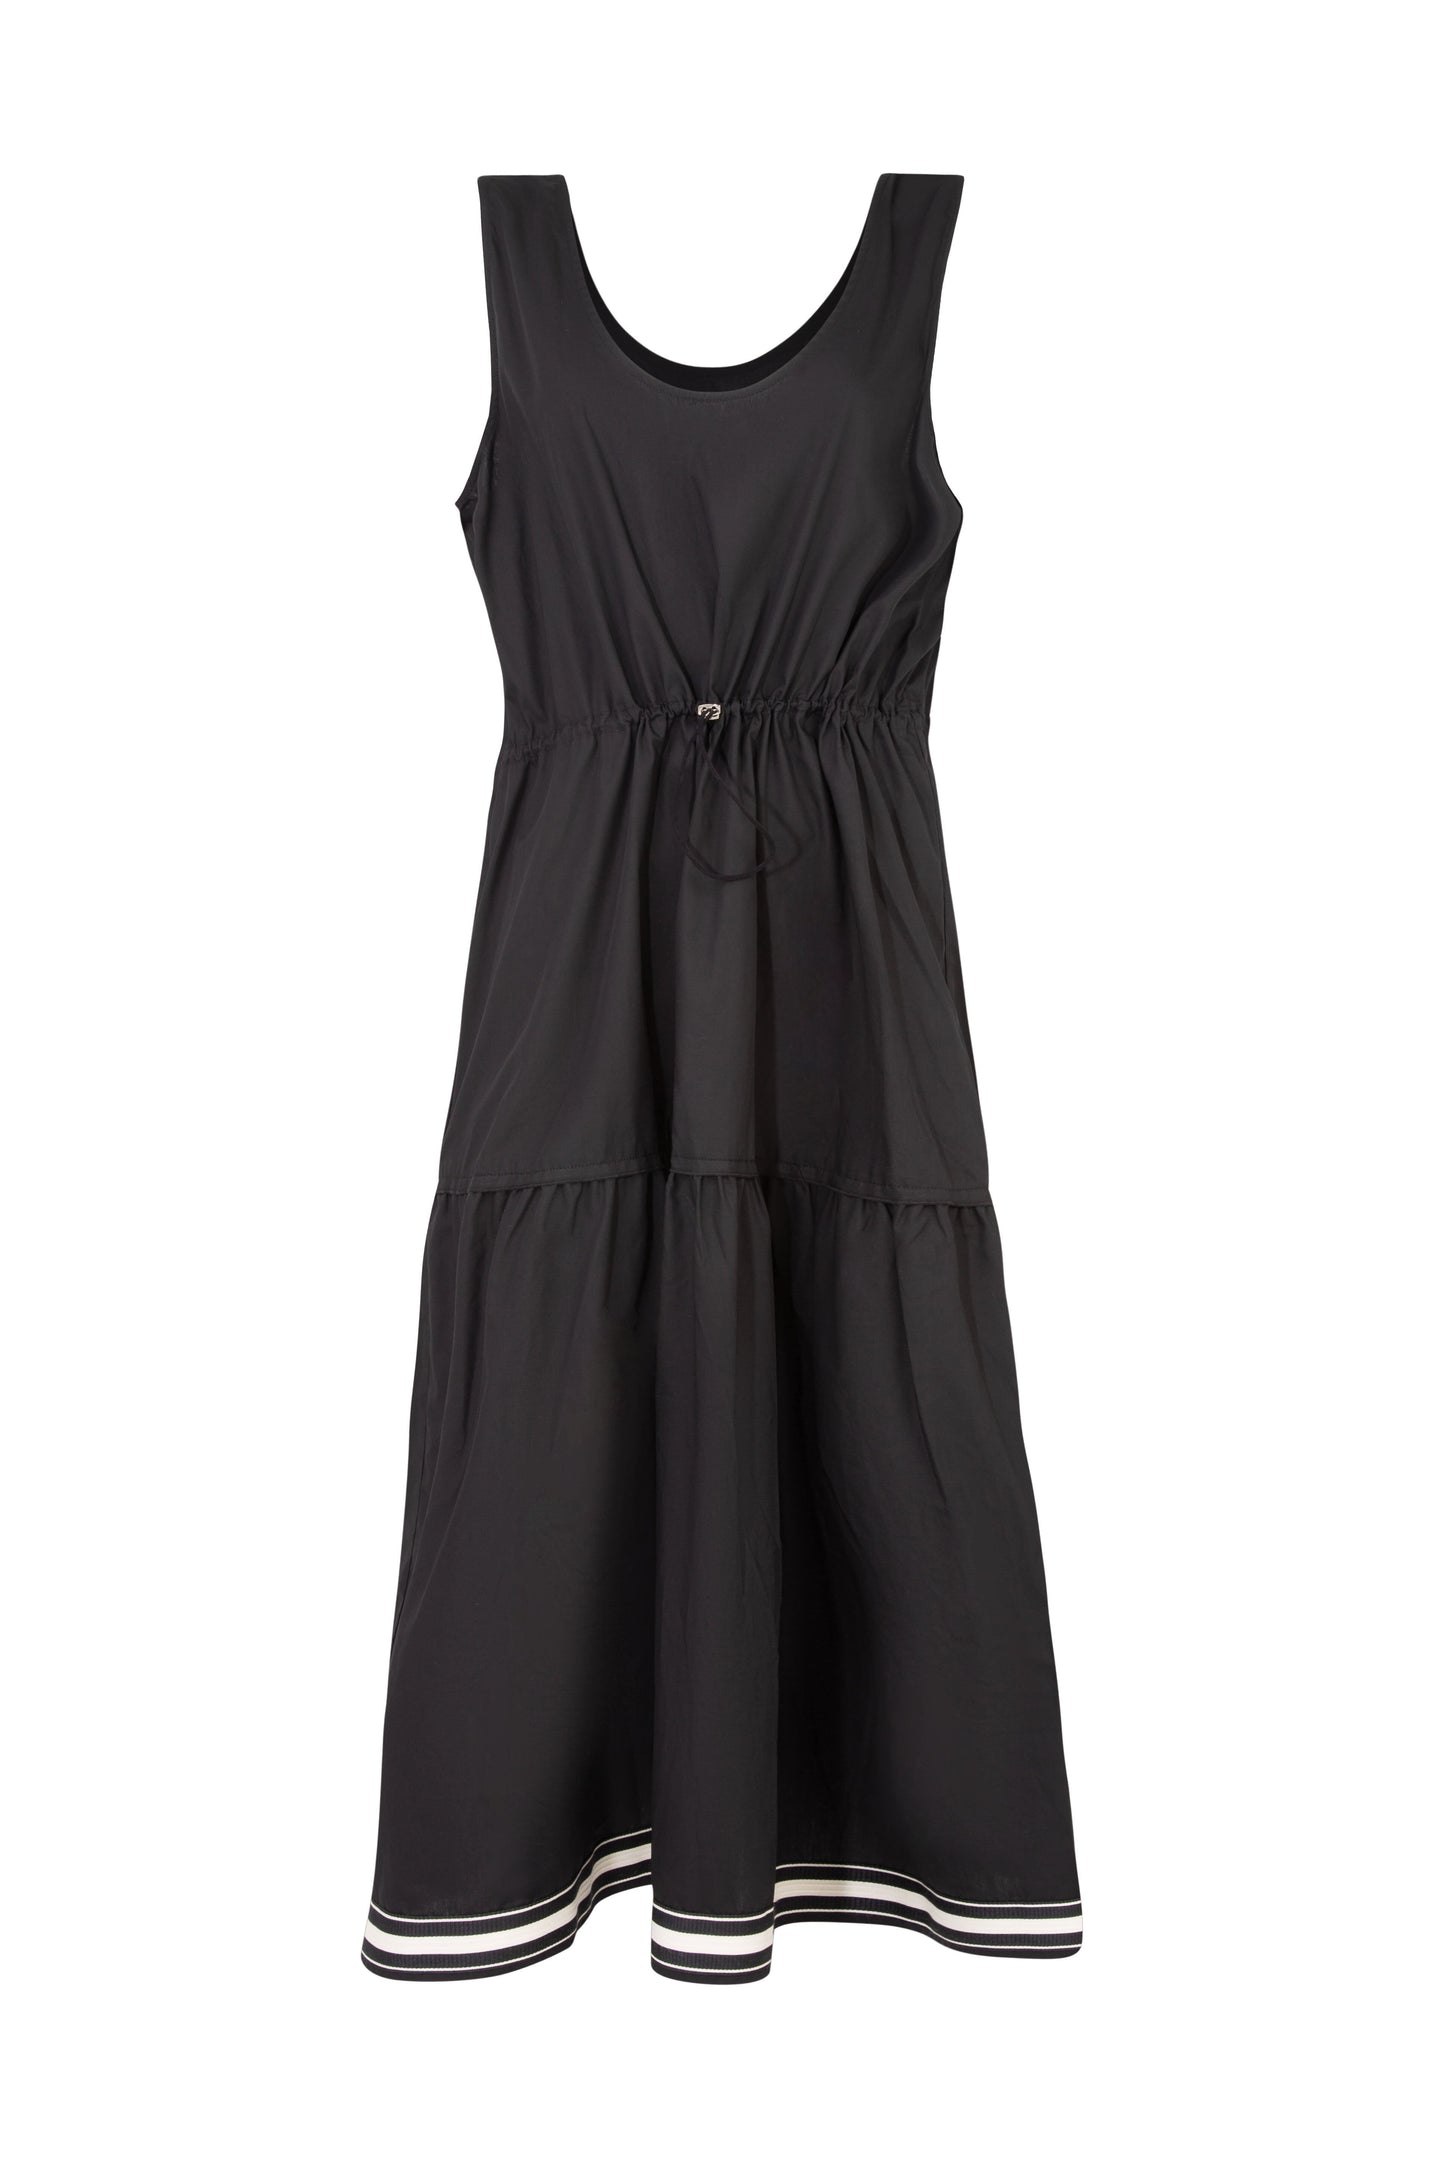 COOPER TWO OF A KIND DRESS - BLACK - THE VOGUE STORE